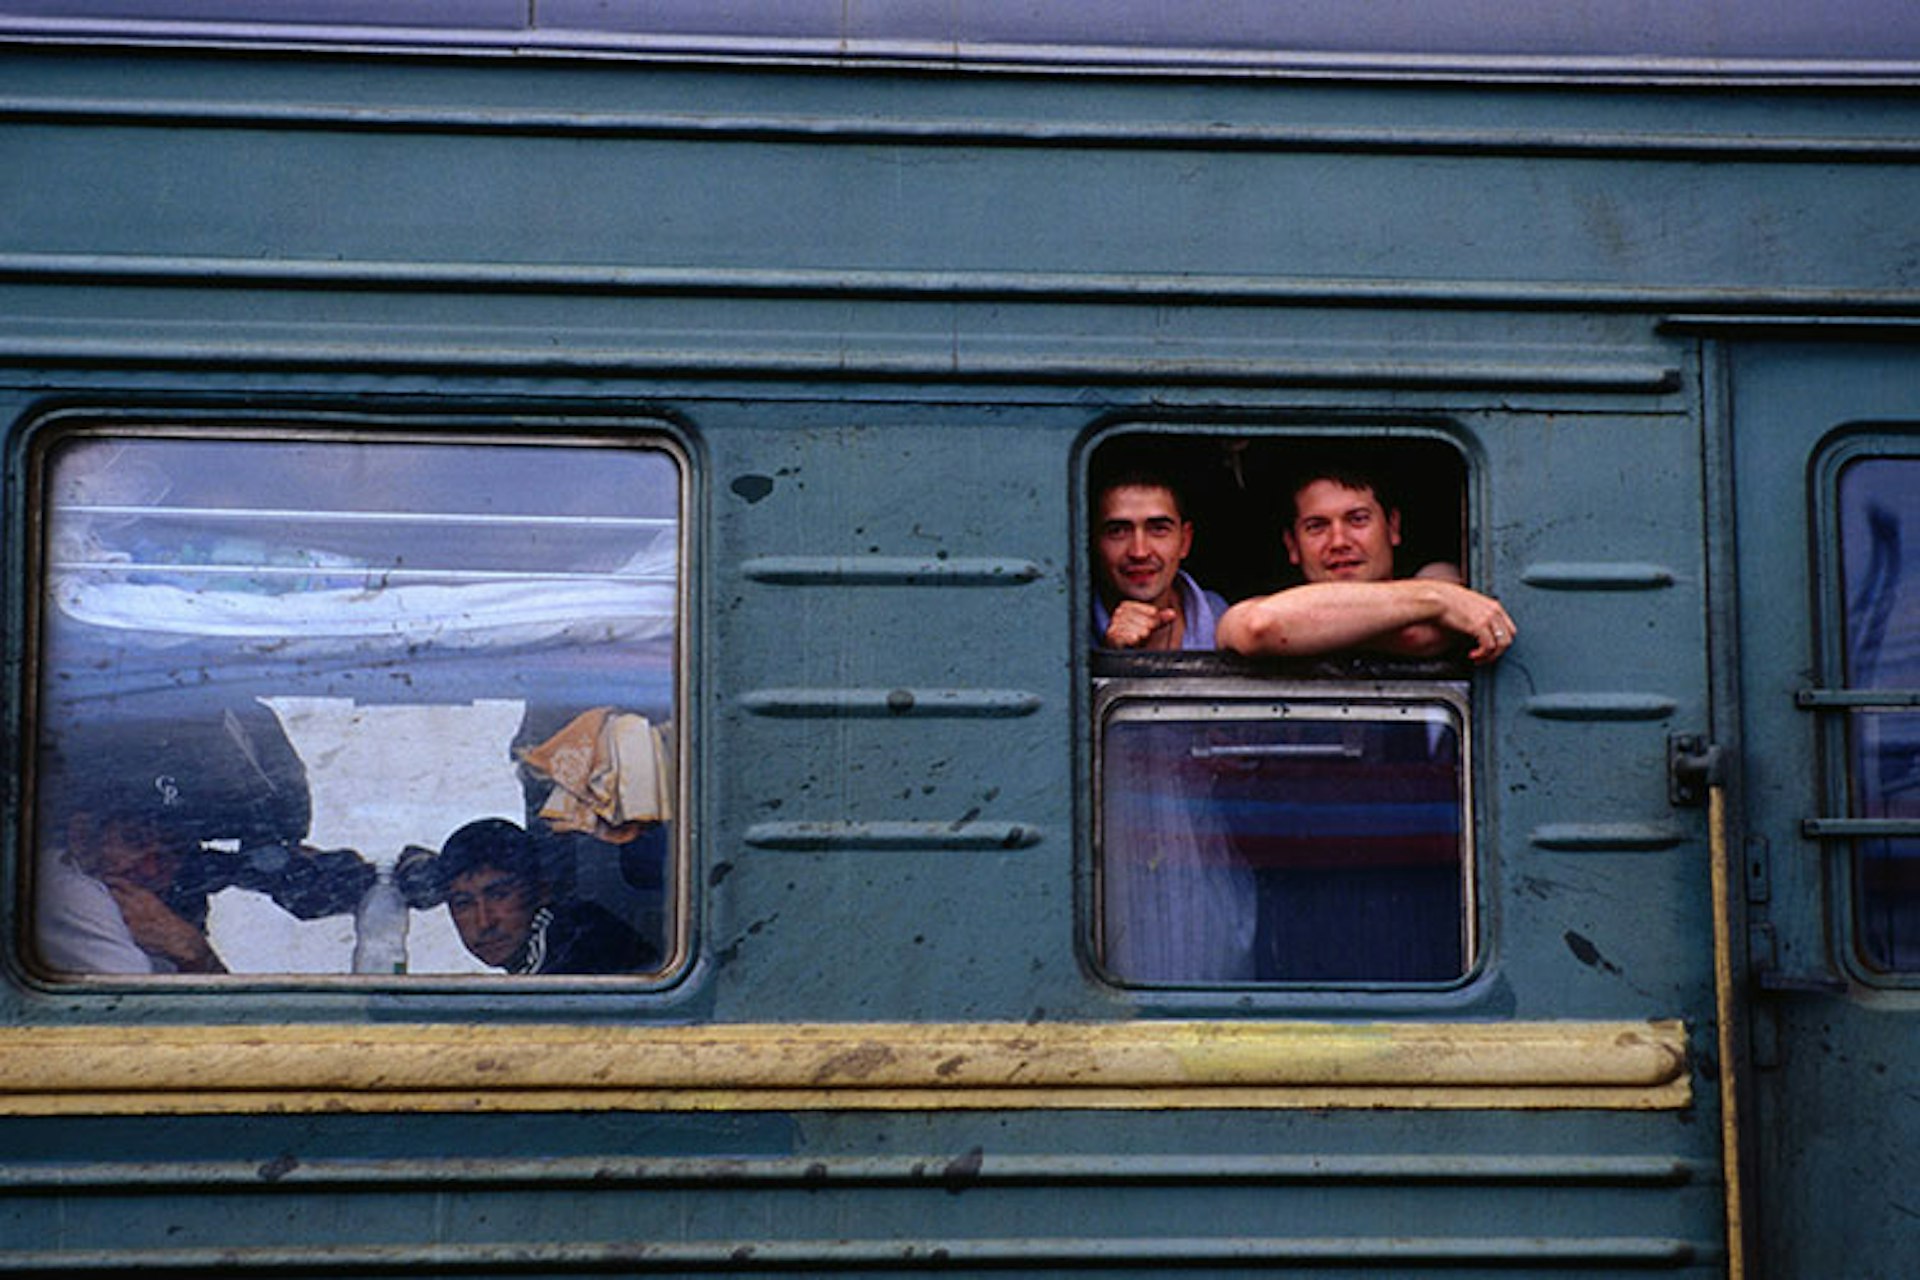 Passengers crossing Siberia on a Russian train © Patrick Horton / Lonely Planet Images / Getty Images